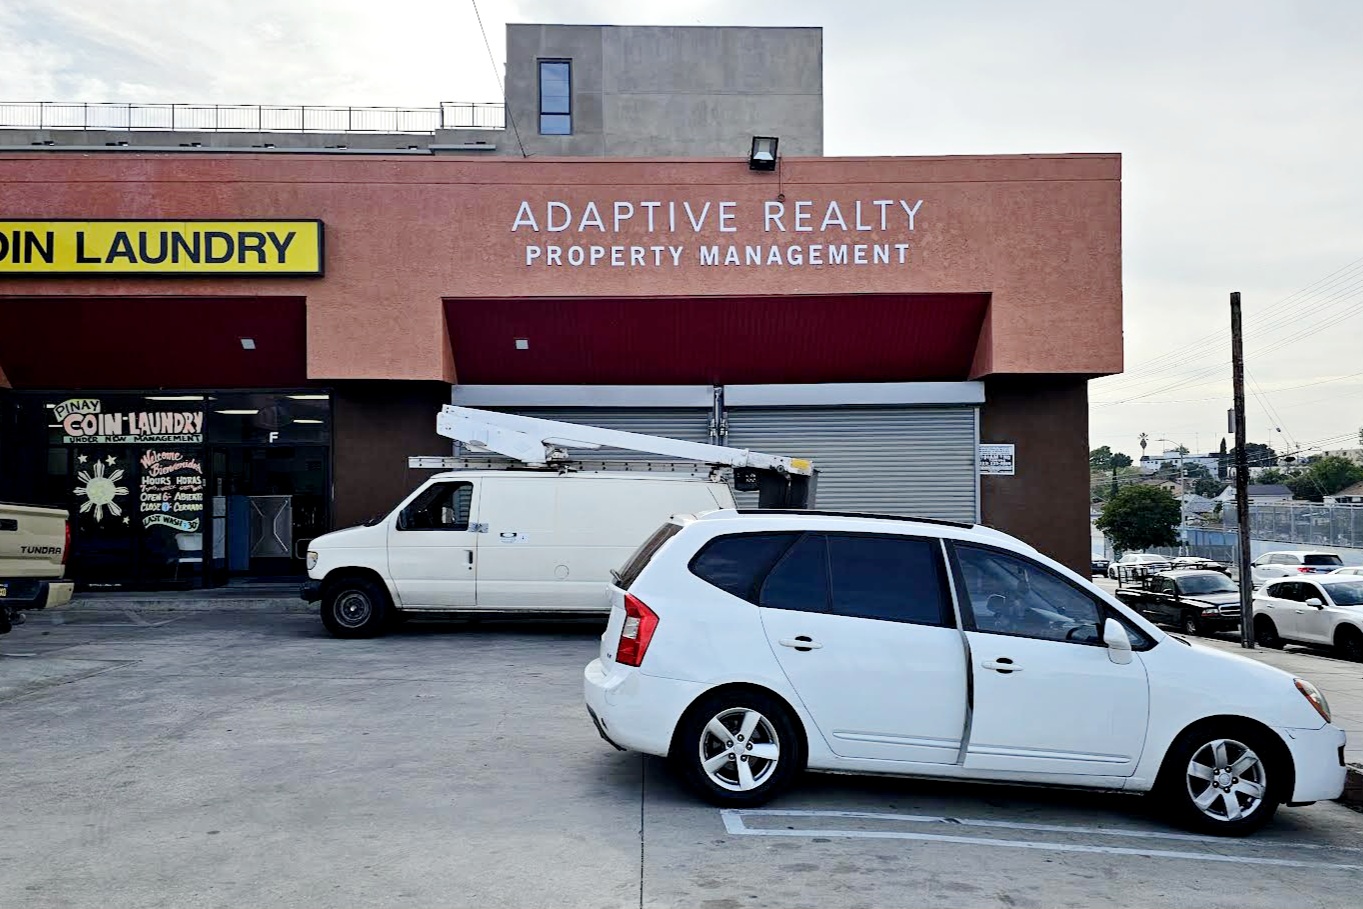 You are currently viewing Adaptive Realty Dimensional Letters and Pole Sign Los Angeles 